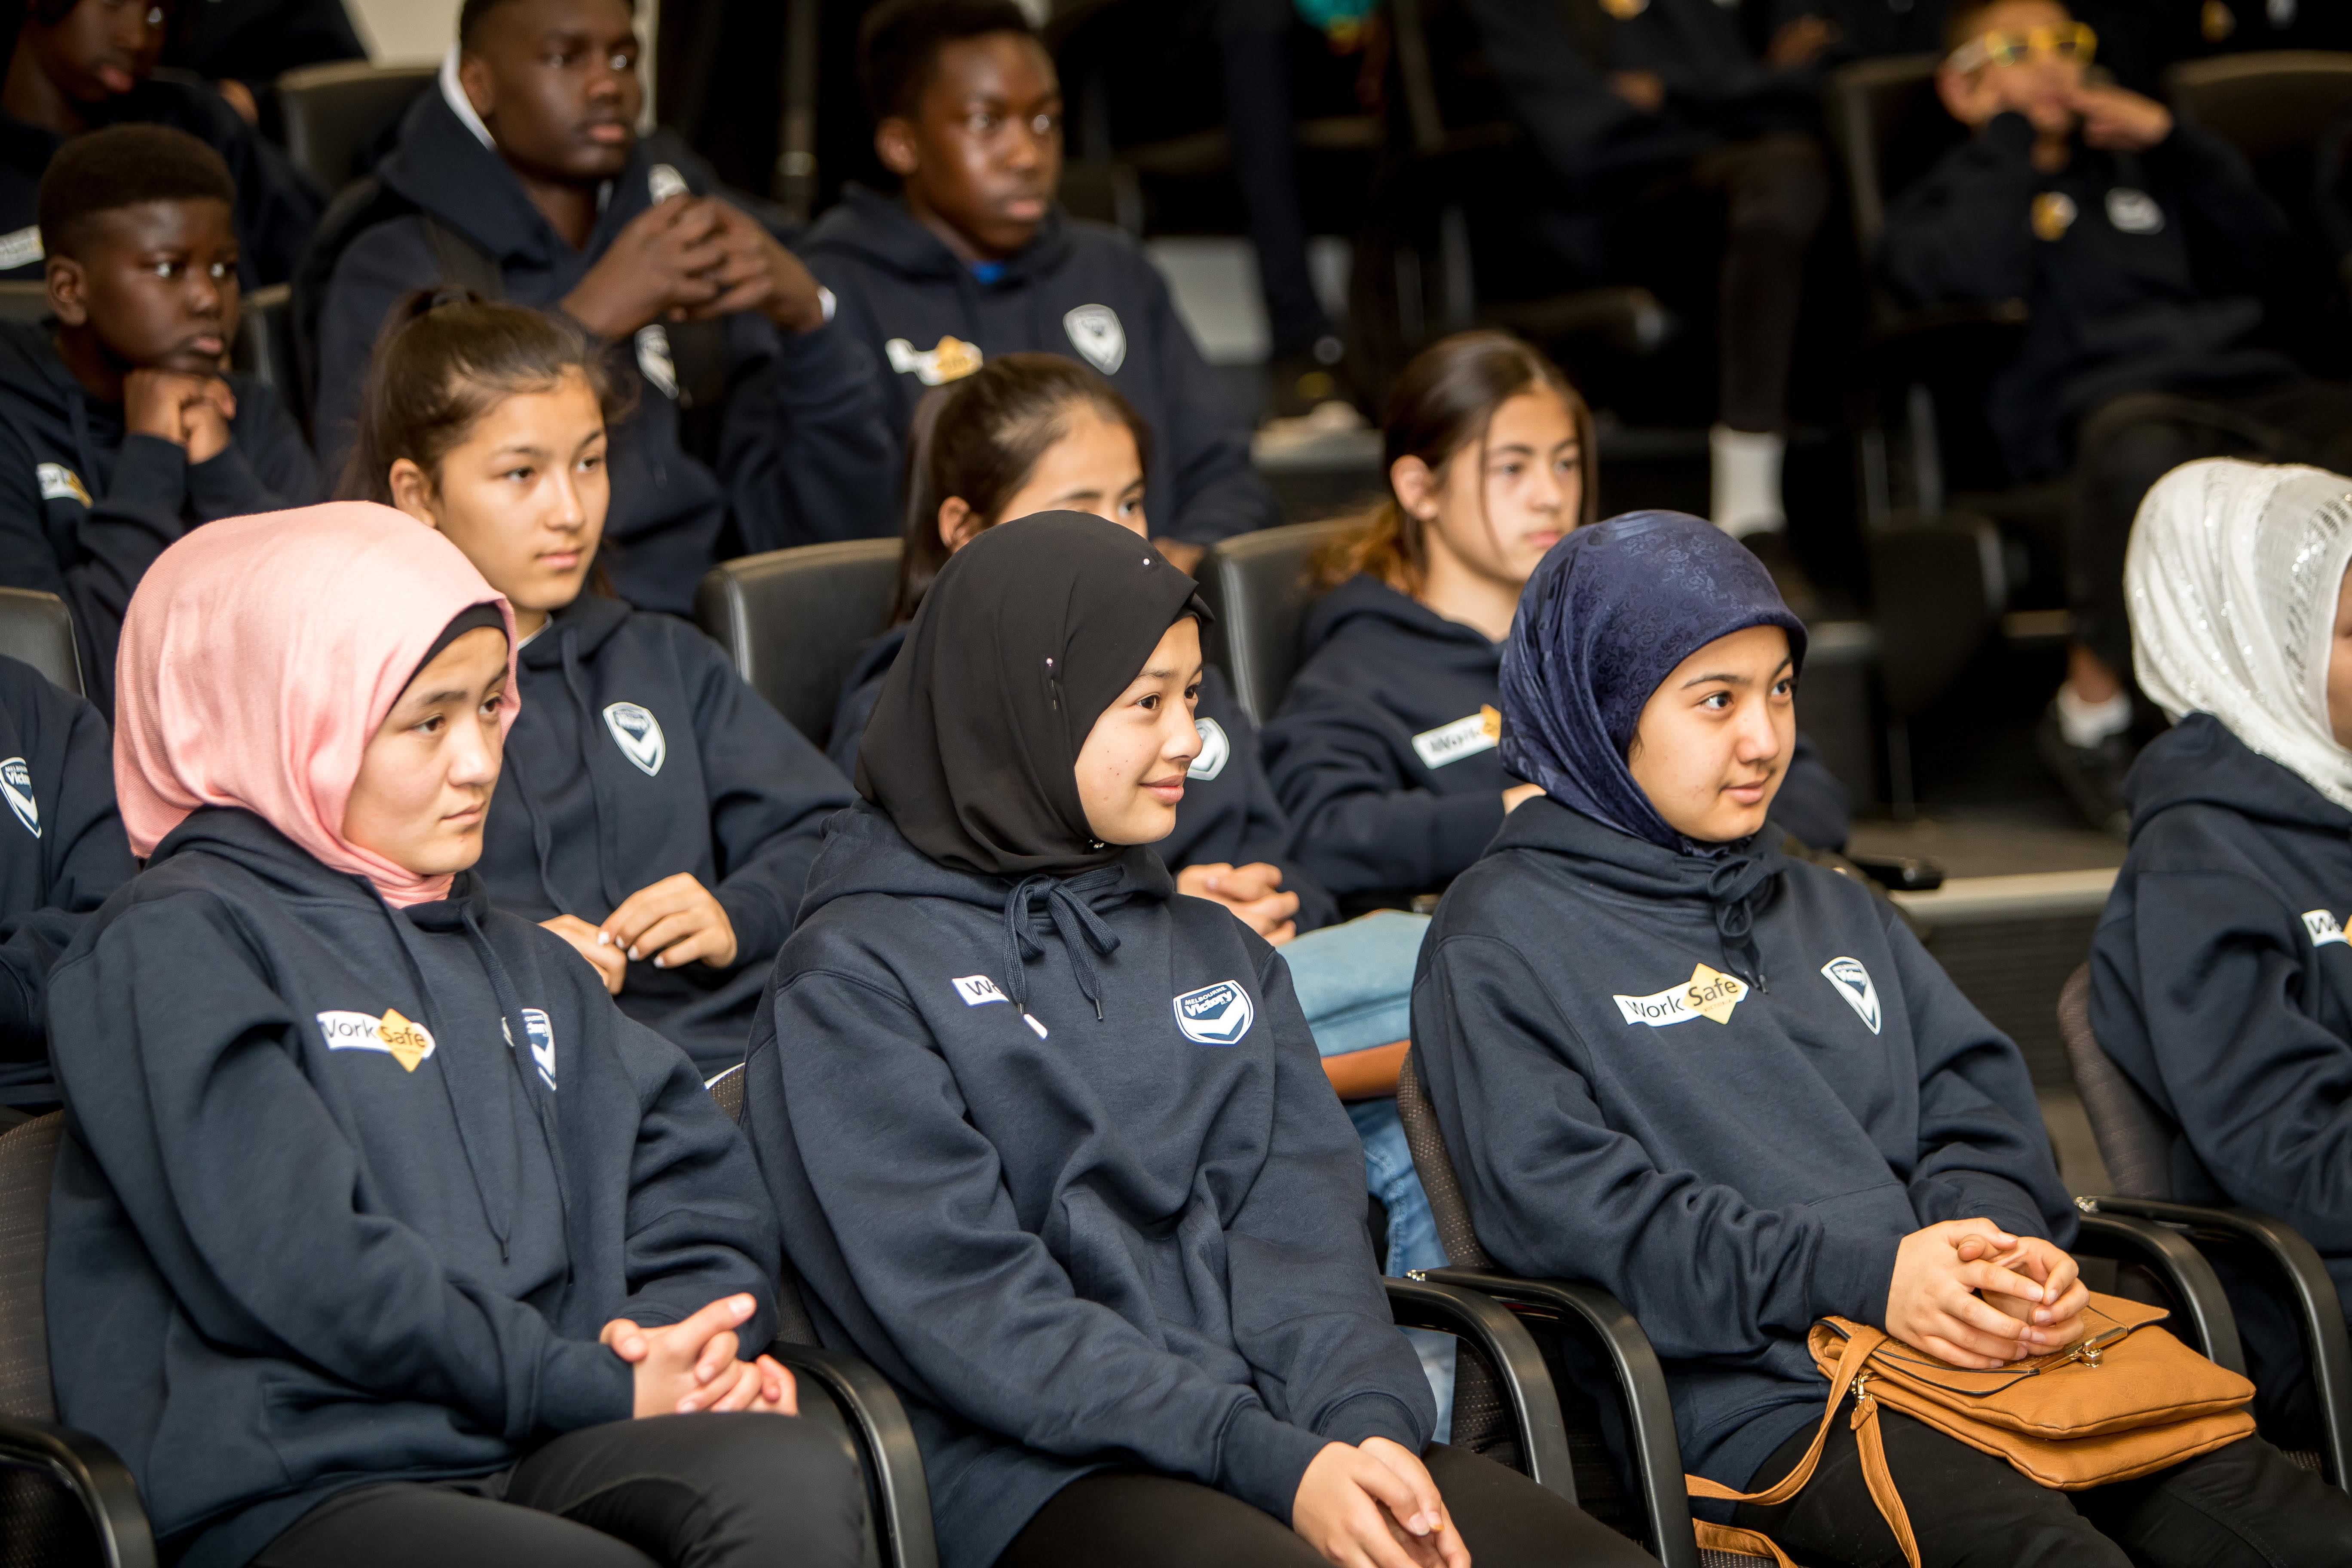 Participants enjoyed presentations from A-League and W-League players